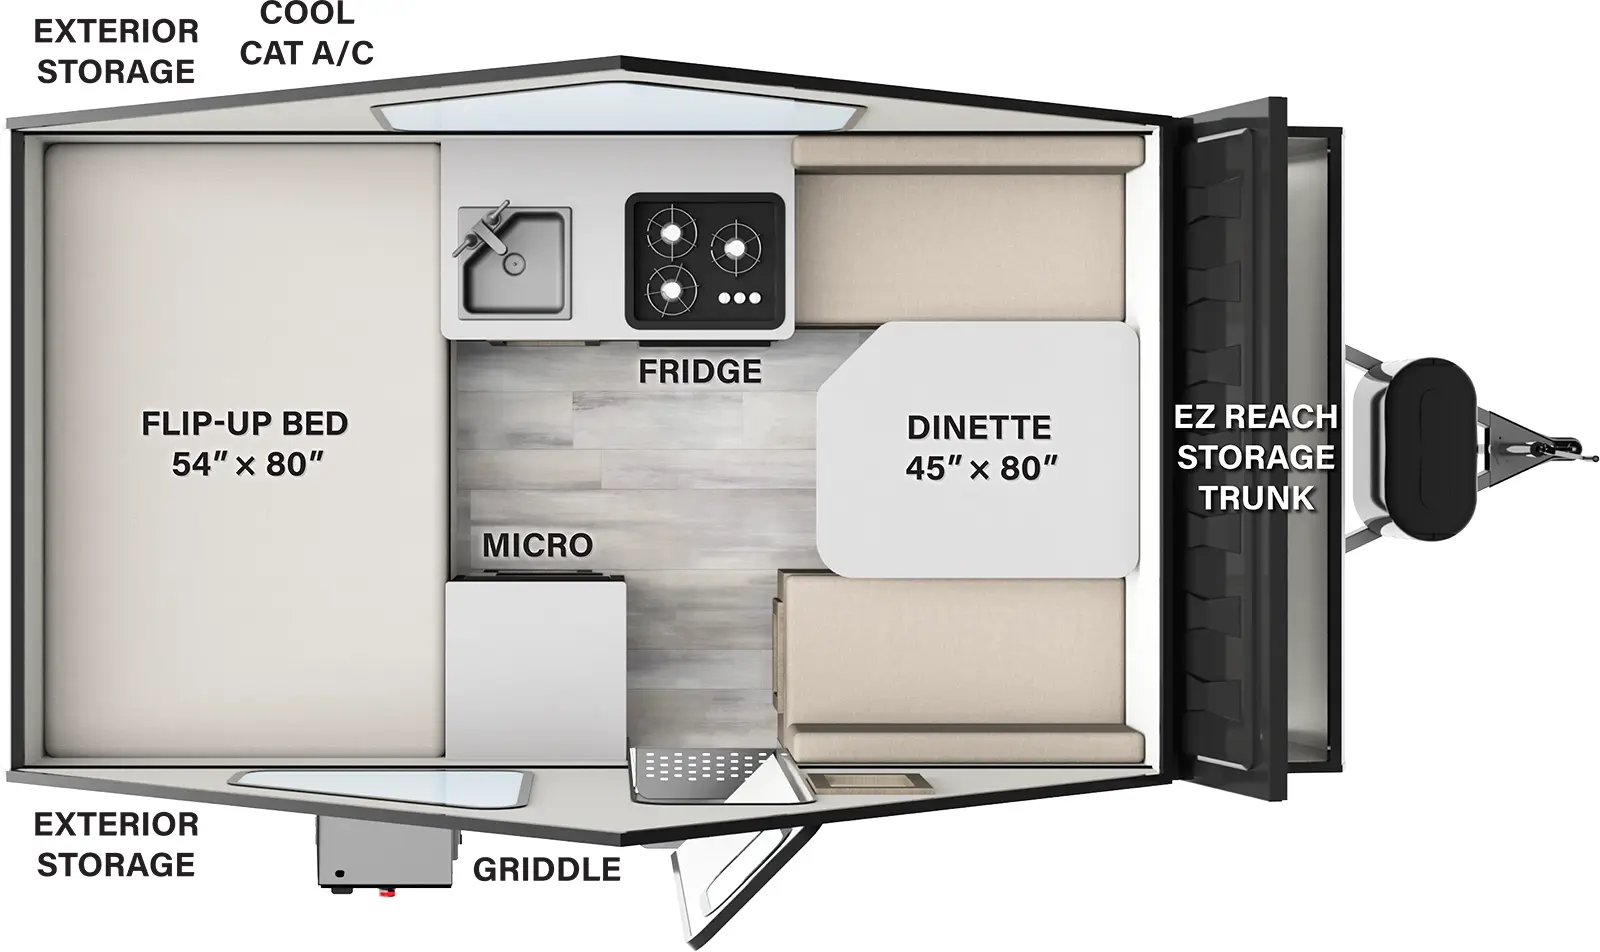 The A122S has no slide outs and one entry door. Exterior features include a griddle on the door side, EZ reach storage trunk, and exterior storage. Interior layout from front to back: a dinette in the front; cook top stove with a sink and a refrigerator; microwave cabinet; flip-up bed with a cool cat air conditioner in the rear.